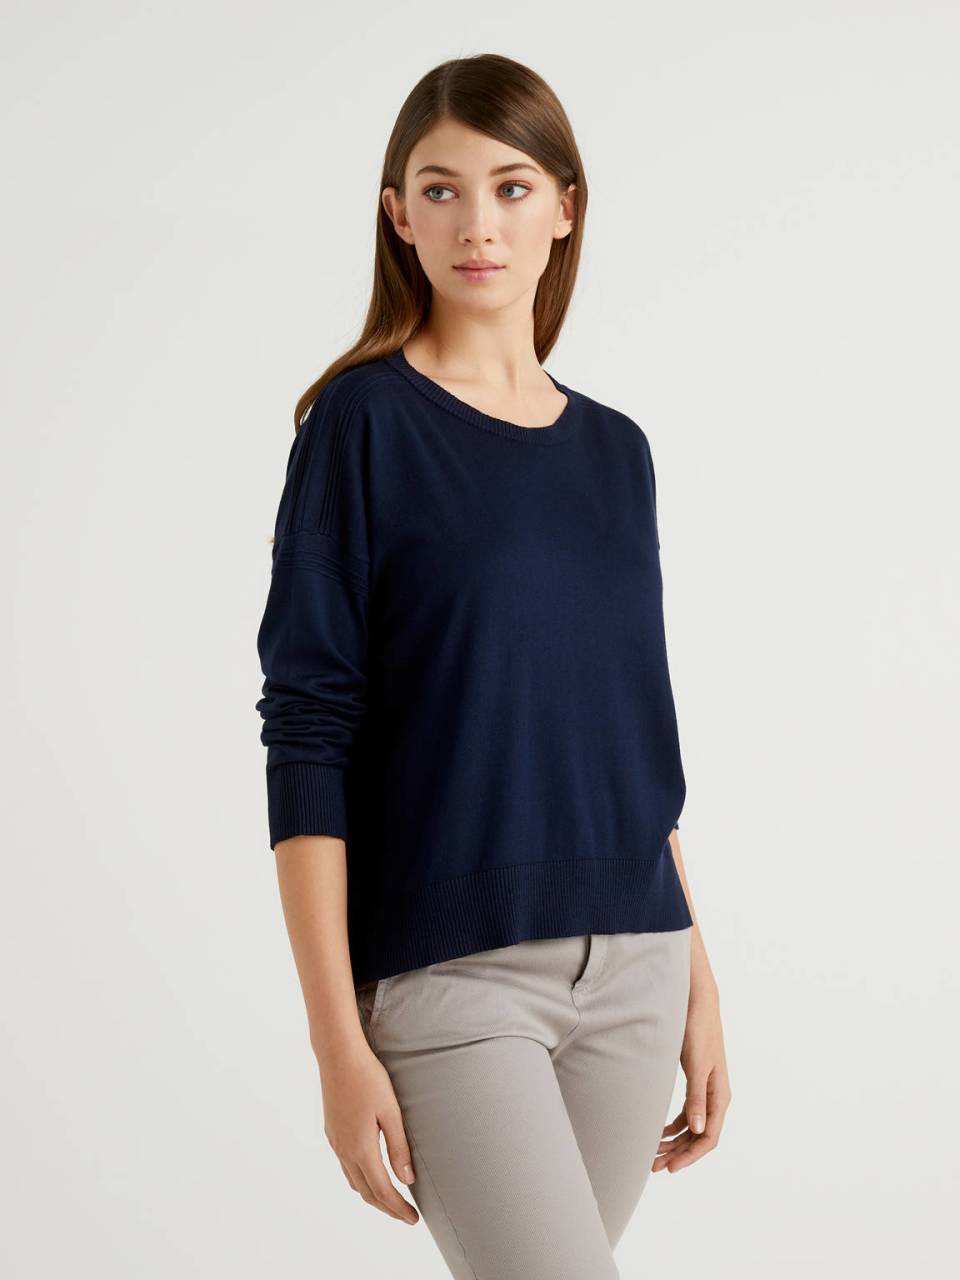 Benetton Blue sweater with slit on the back. 1